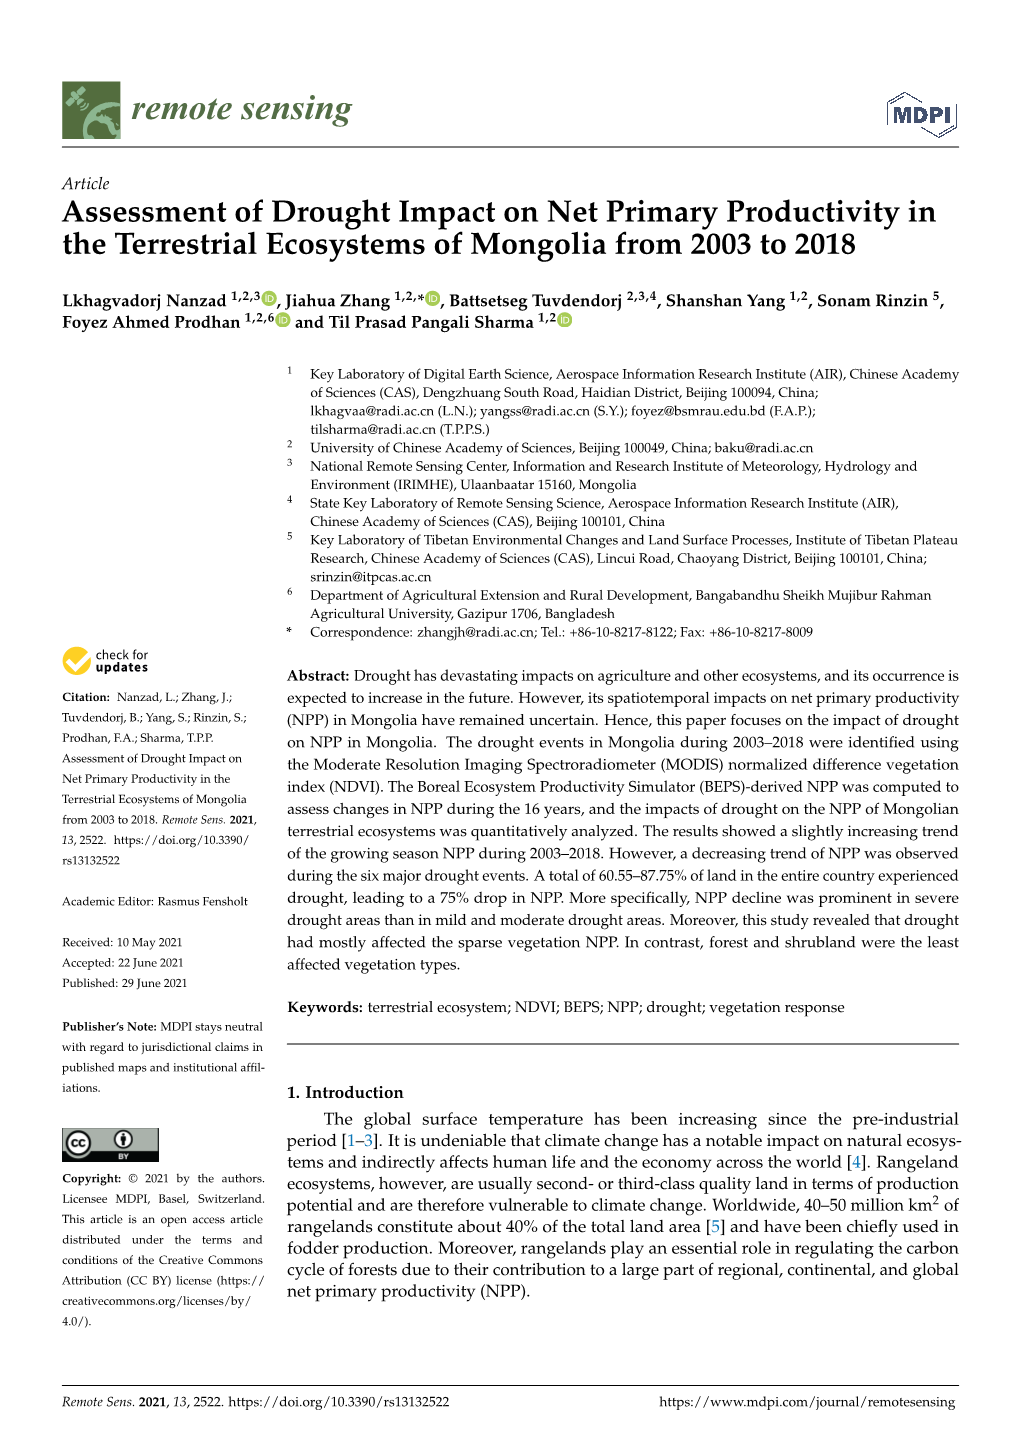 Assessment of Drought Impact on Net Primary Productivity in the Terrestrial Ecosystems of Mongolia from 2003 to 2018